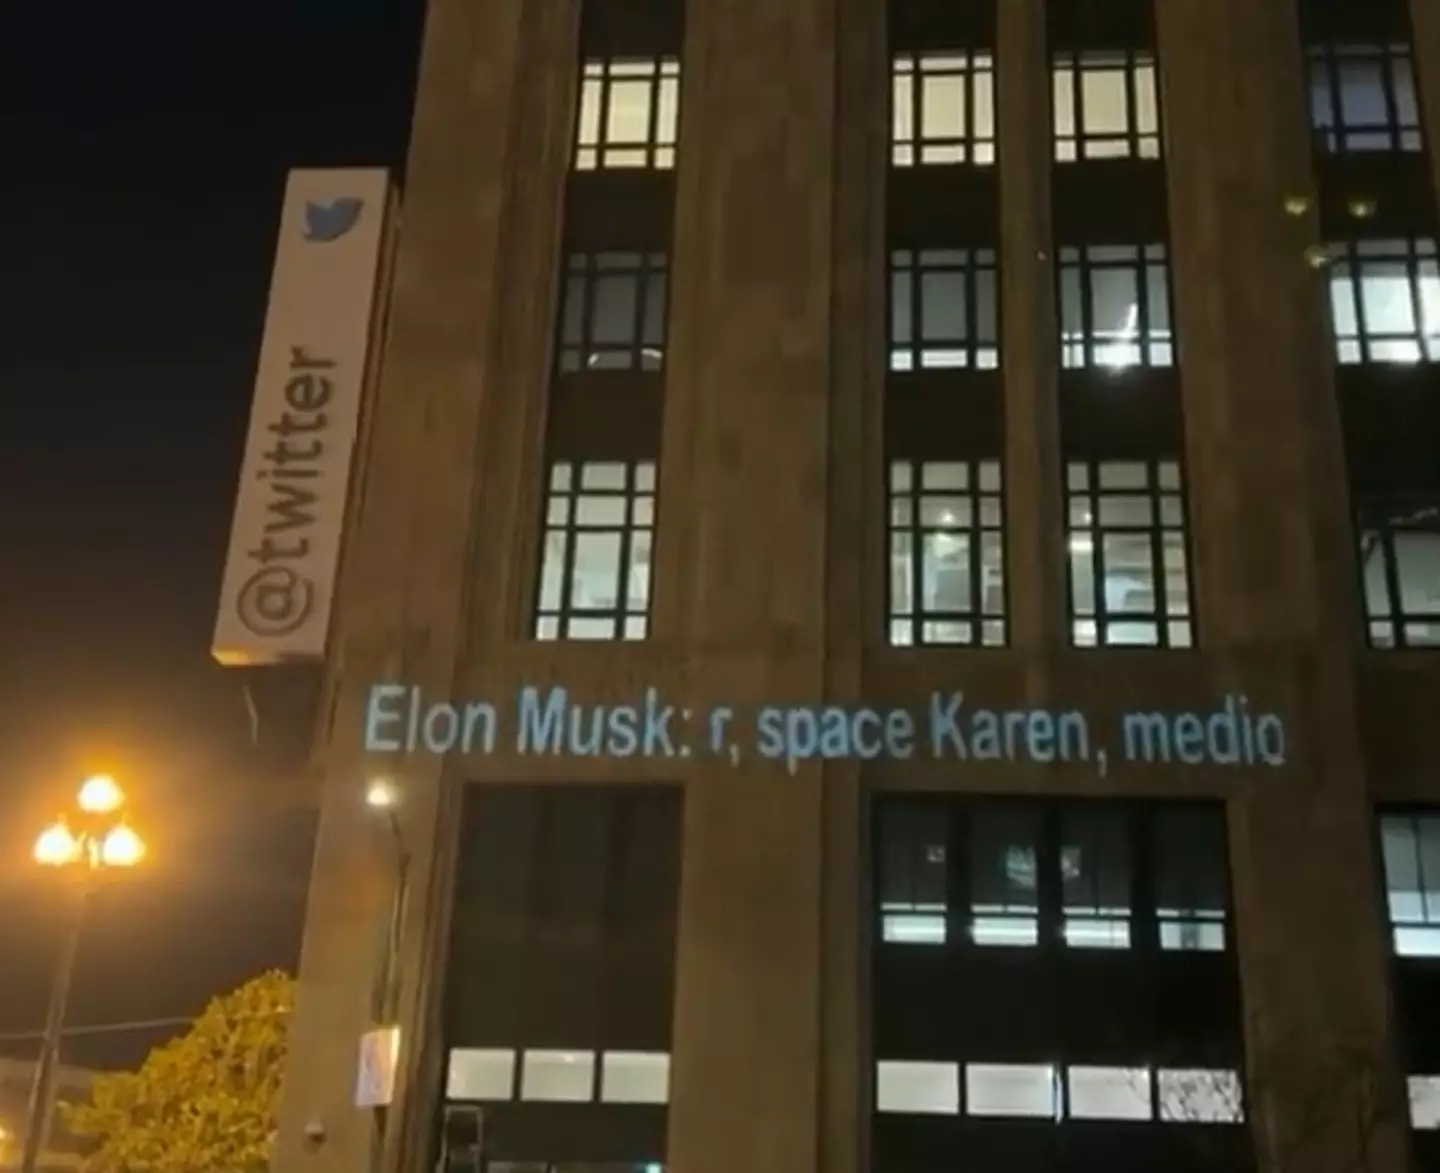 Musk was branded a 'space Karen' by the messages.